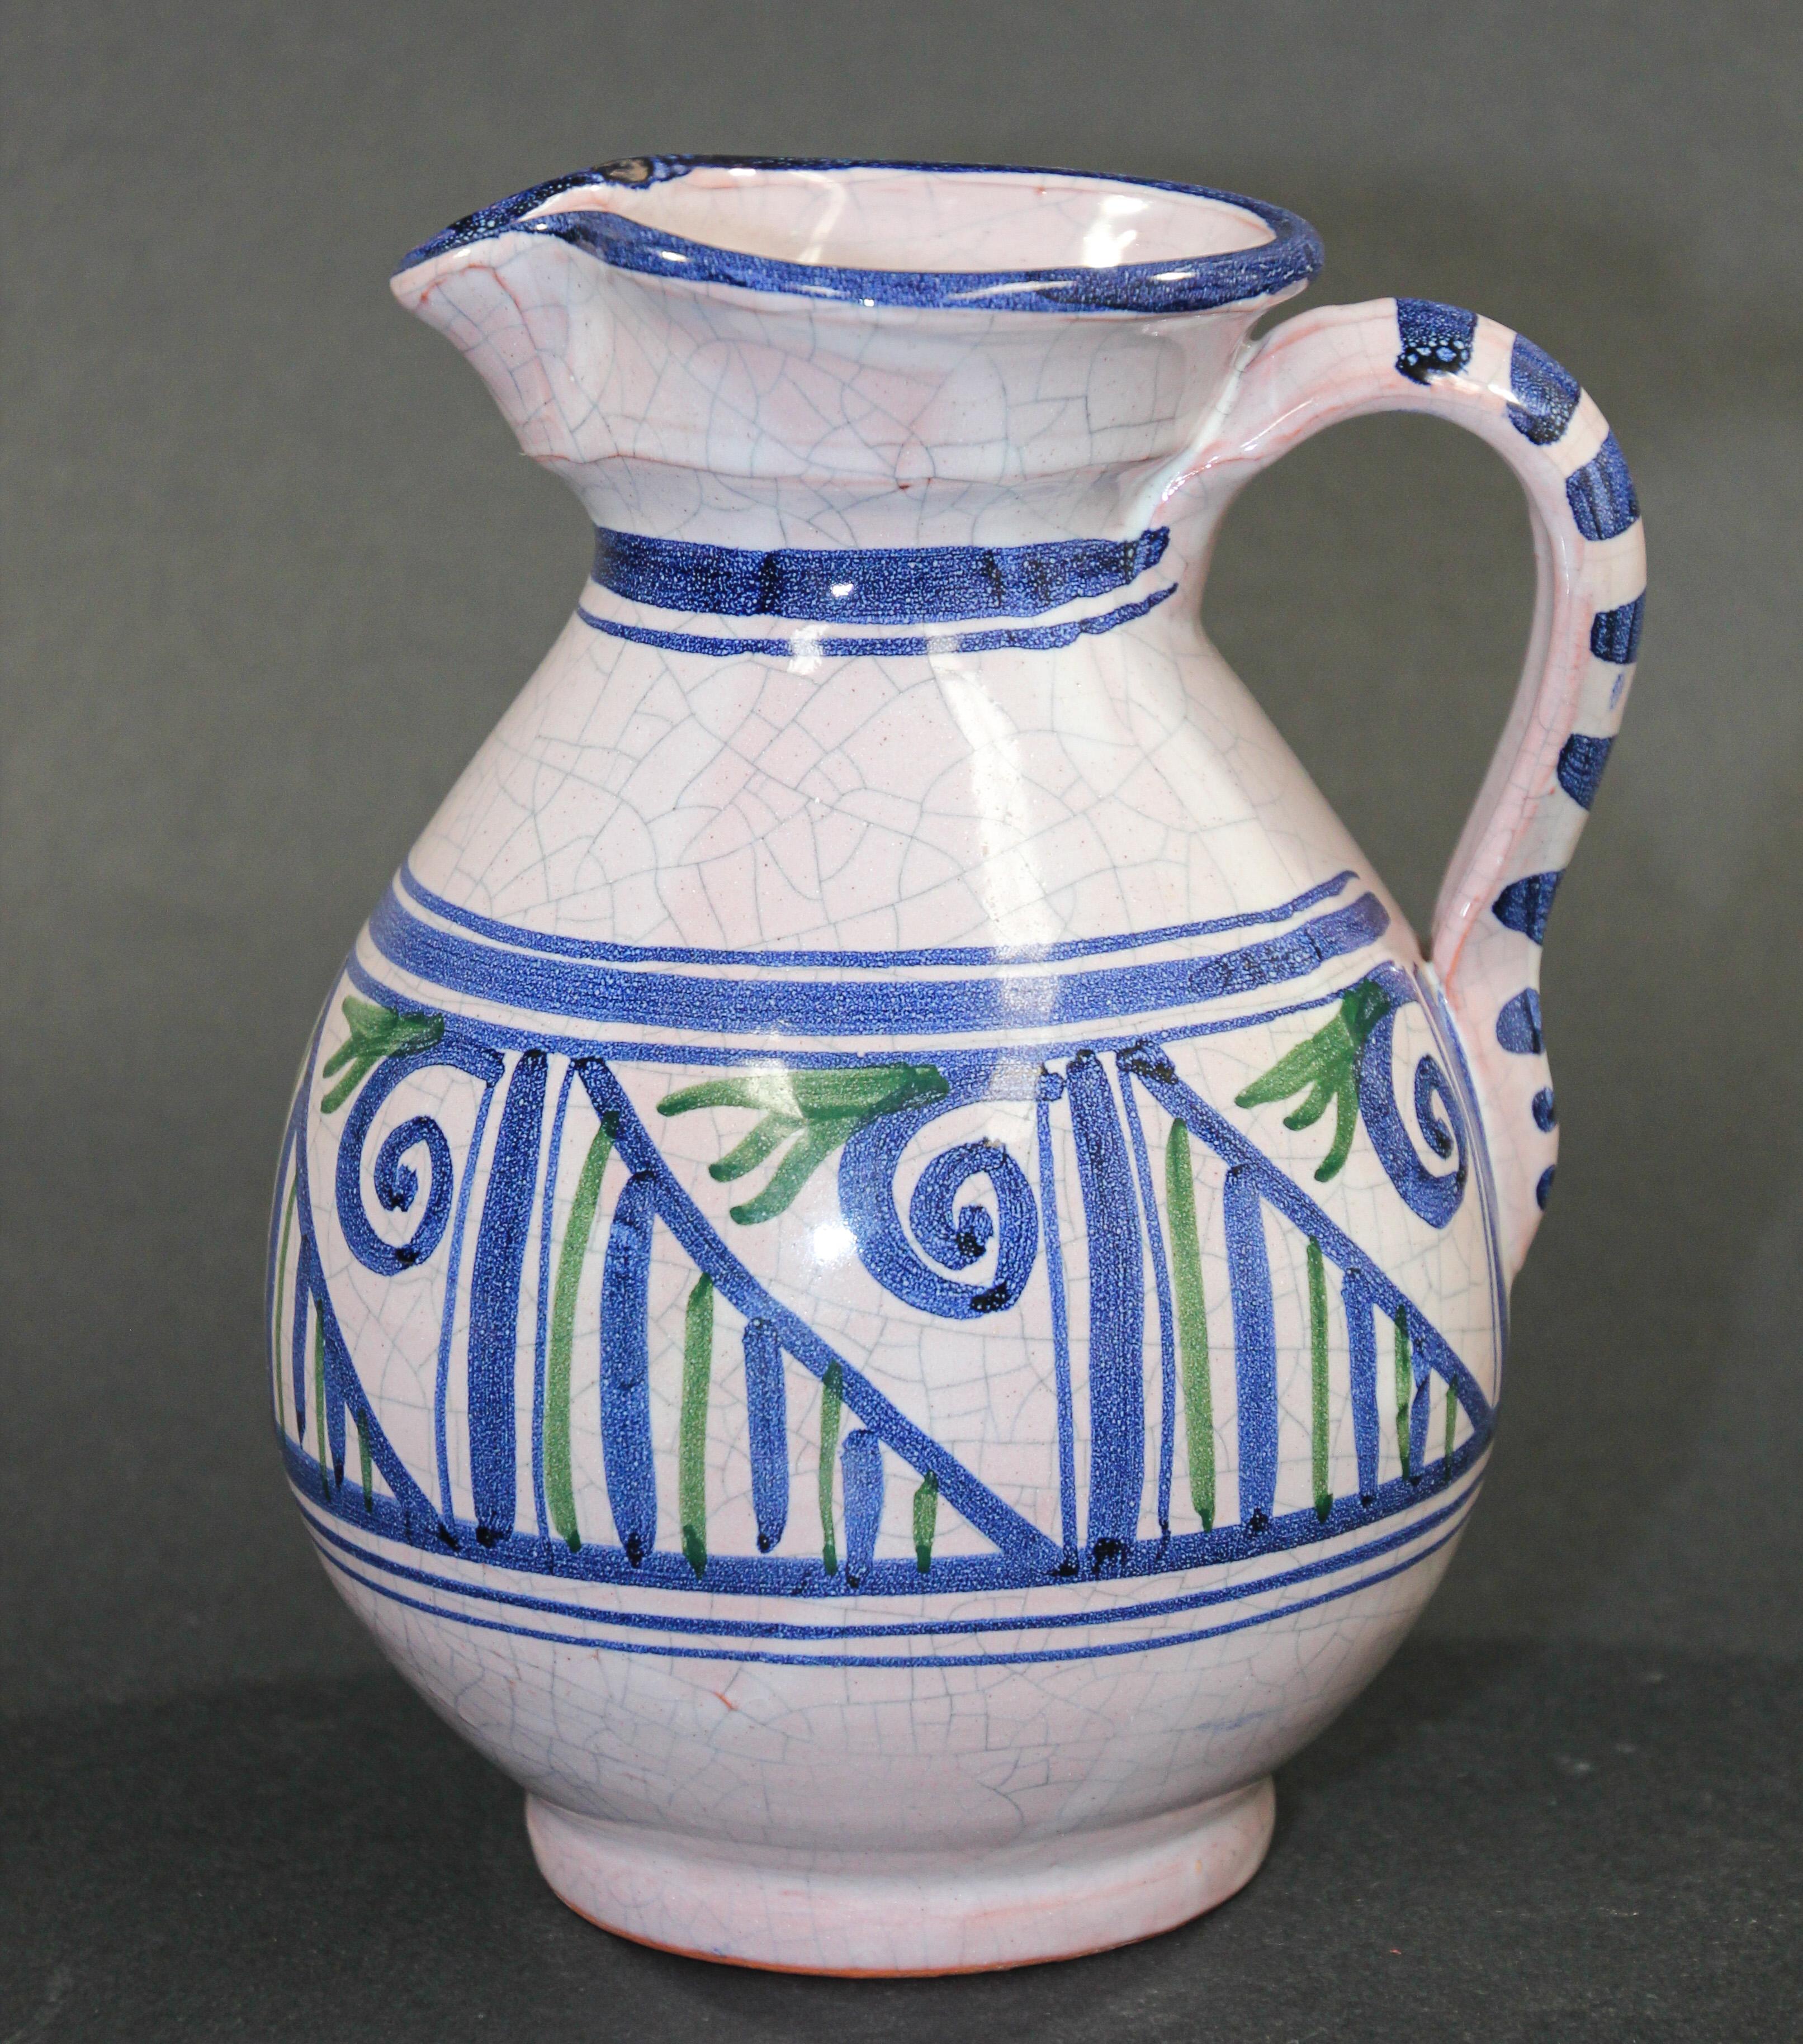 Glazed polychrome ceramic Talavera pitcher or flower vase with blue, green and white design.
Hand painted Talavera ceramic pitcher, handcrafted by skilled artisans in Spain in the Picasso style.
Unique vintage piece of traditional Spanish Talavera